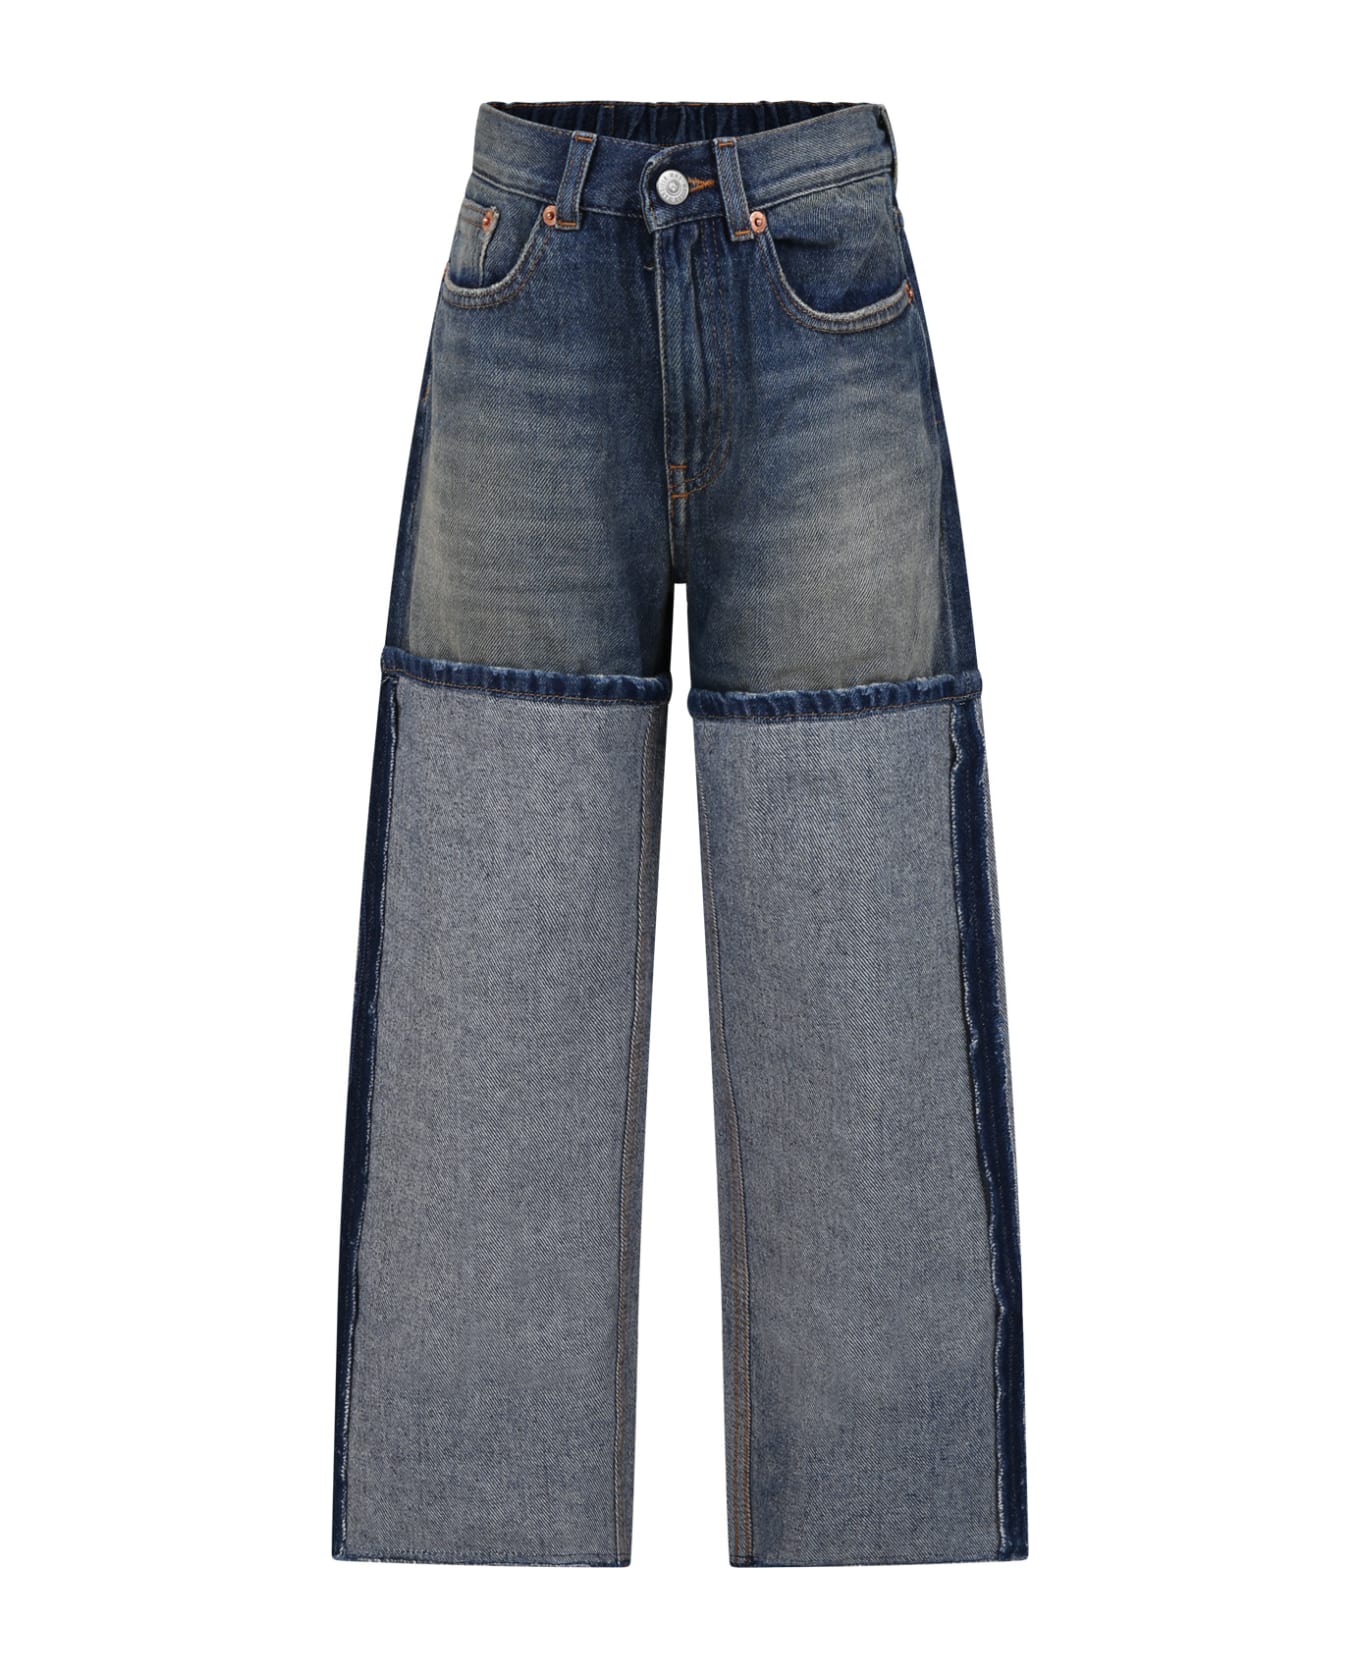 MM6 Maison Margiela Denim Jeans For Girl With Contrasting Stitching - Denim ボトムス